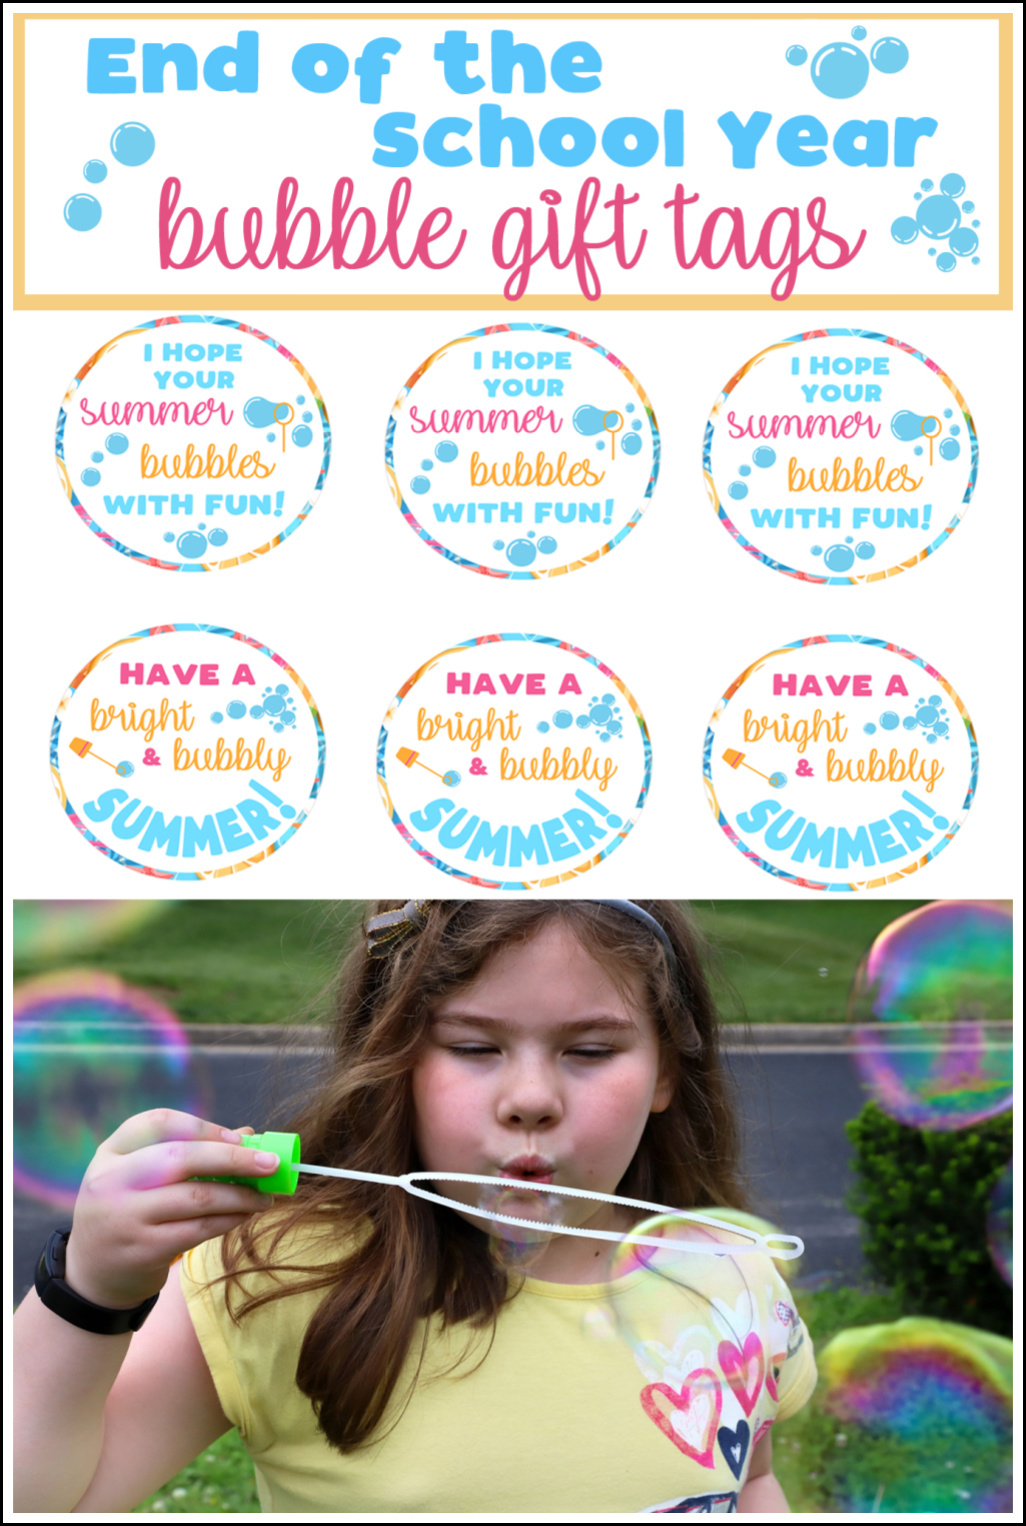 End Of School Year Summertime Bubble Gift Idea For Kids | Free pertaining to Free Printable Gift Tags for Bubbles